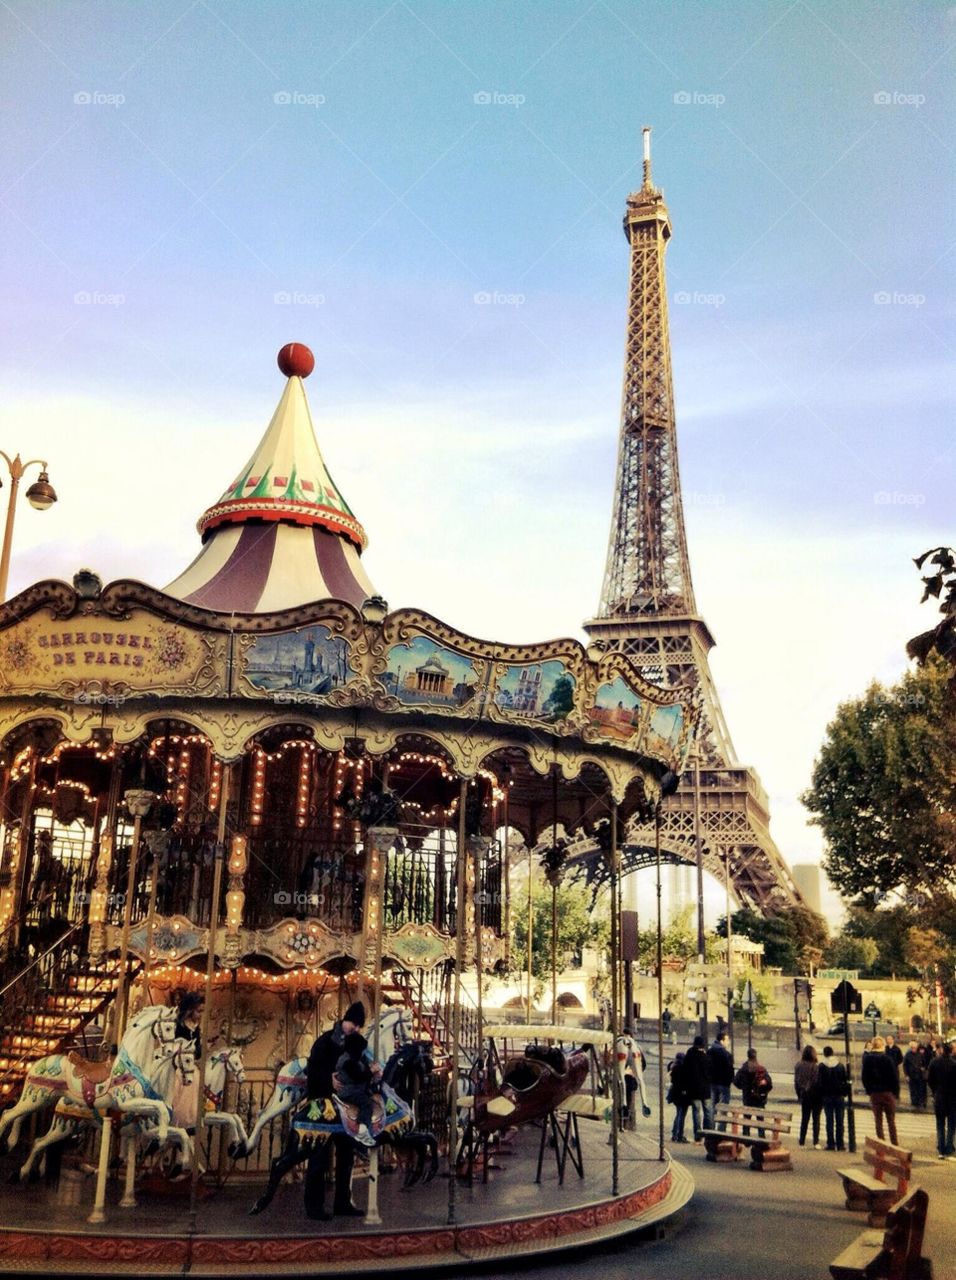 This picture of the merry-go-round in front of the Eiffel Tower is just so whimsical to me, just like Paris is!